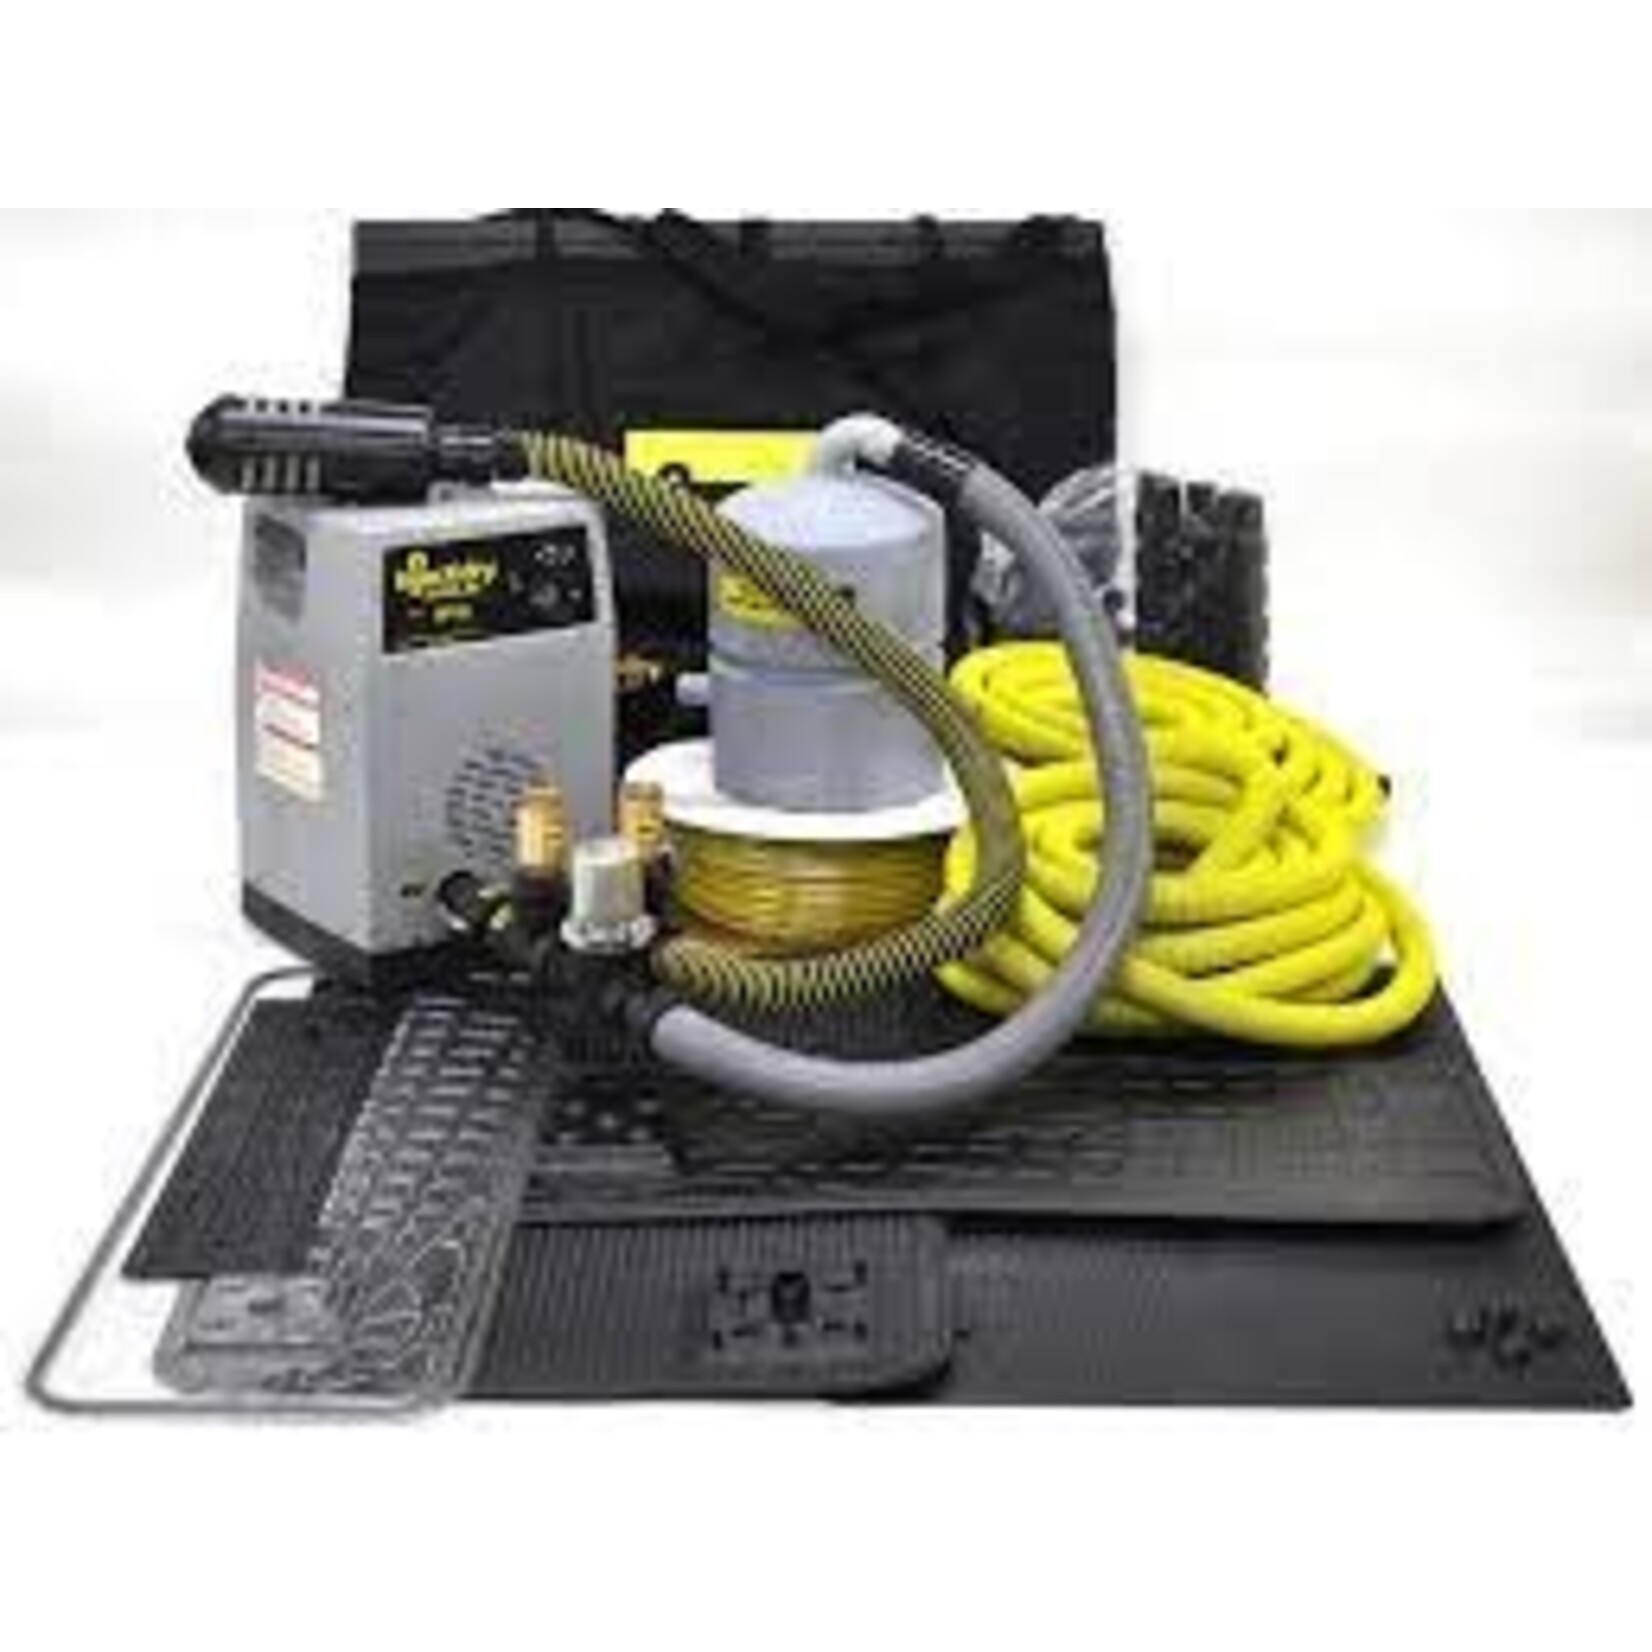 Injectidry Injectidry HP 60 Floor Drying Package Air In Main Hose